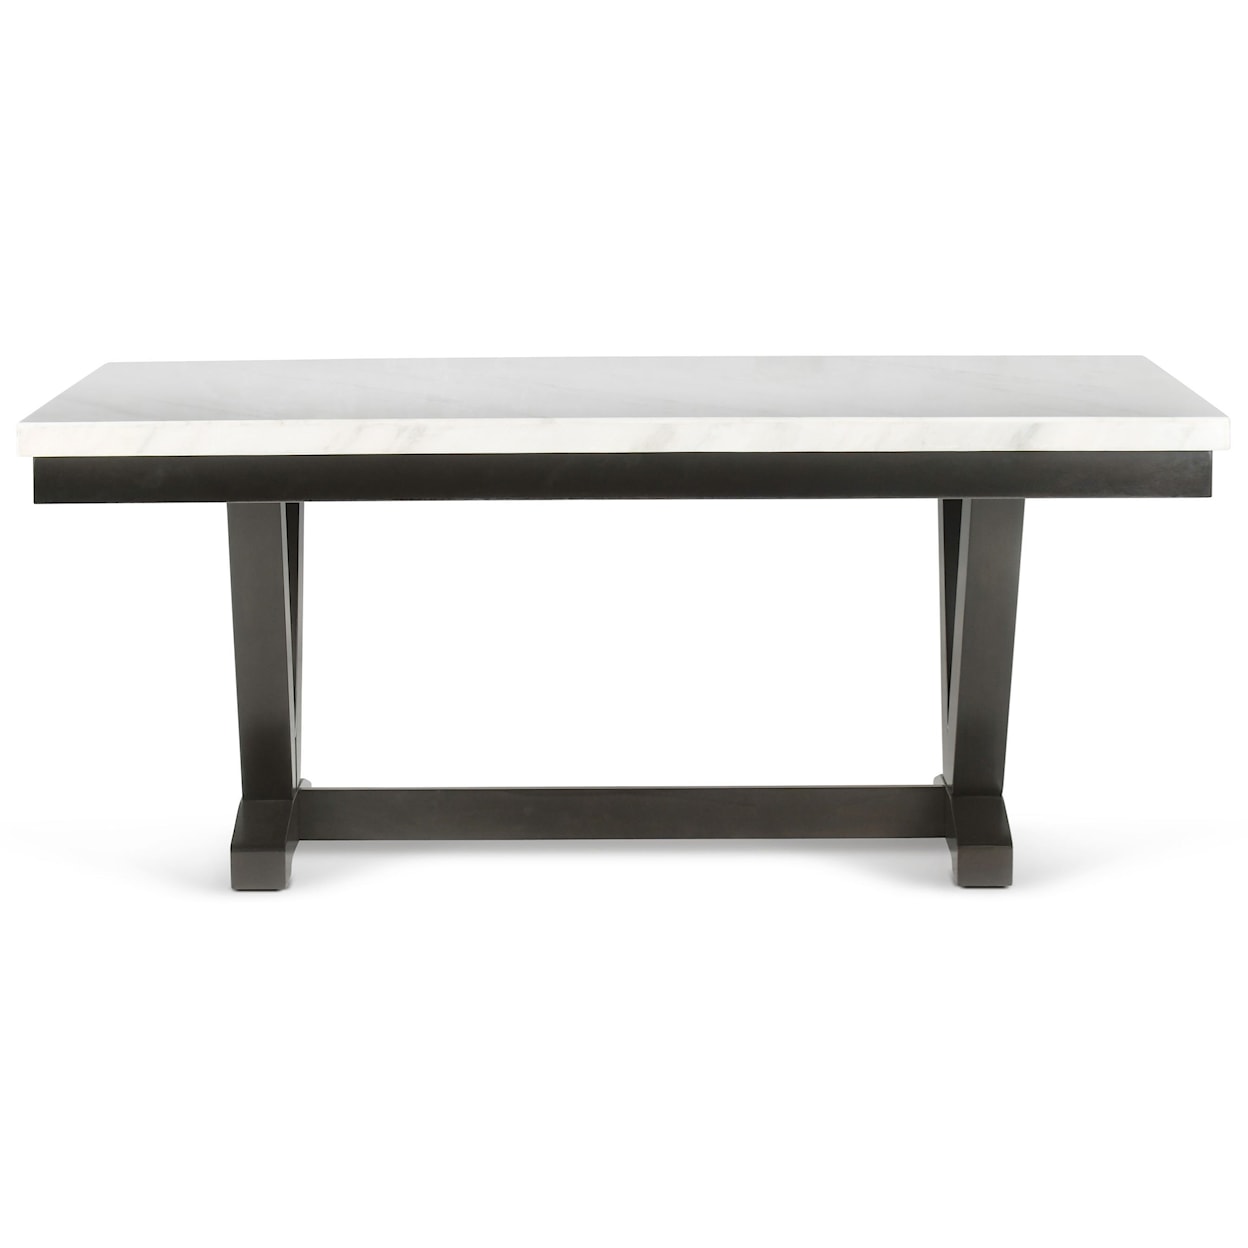 Steve Silver Finley Dining Table